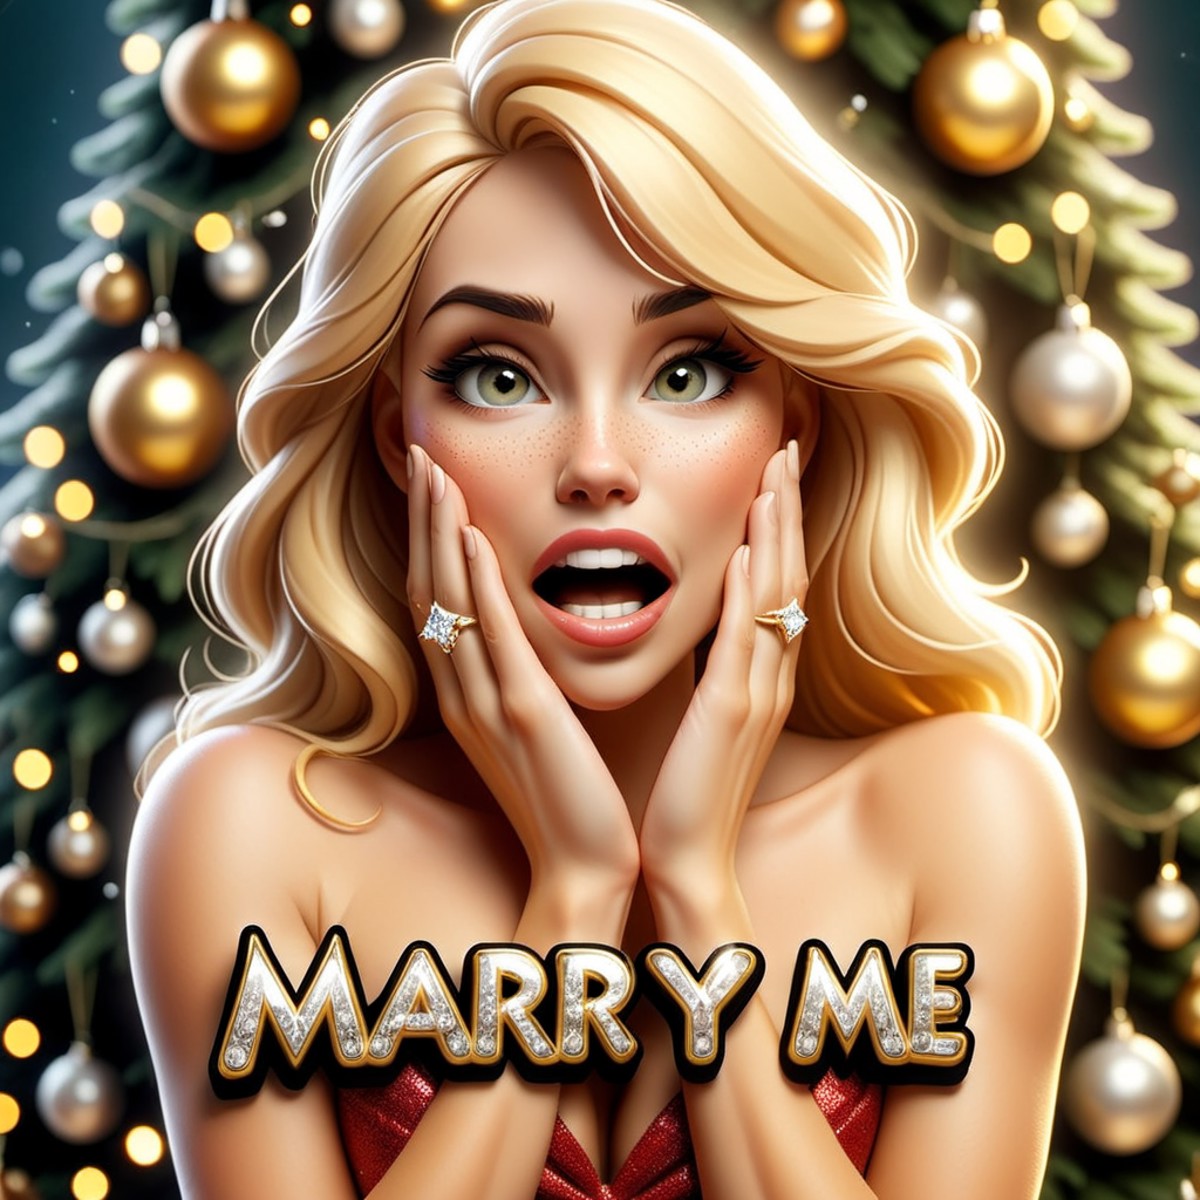 ("MARRY ME" text logo:1.5), gold, diamonds,  <lora:Harrlogos_v2.0:1.6> , blonde woman covering her mouth, diamond ring on ...